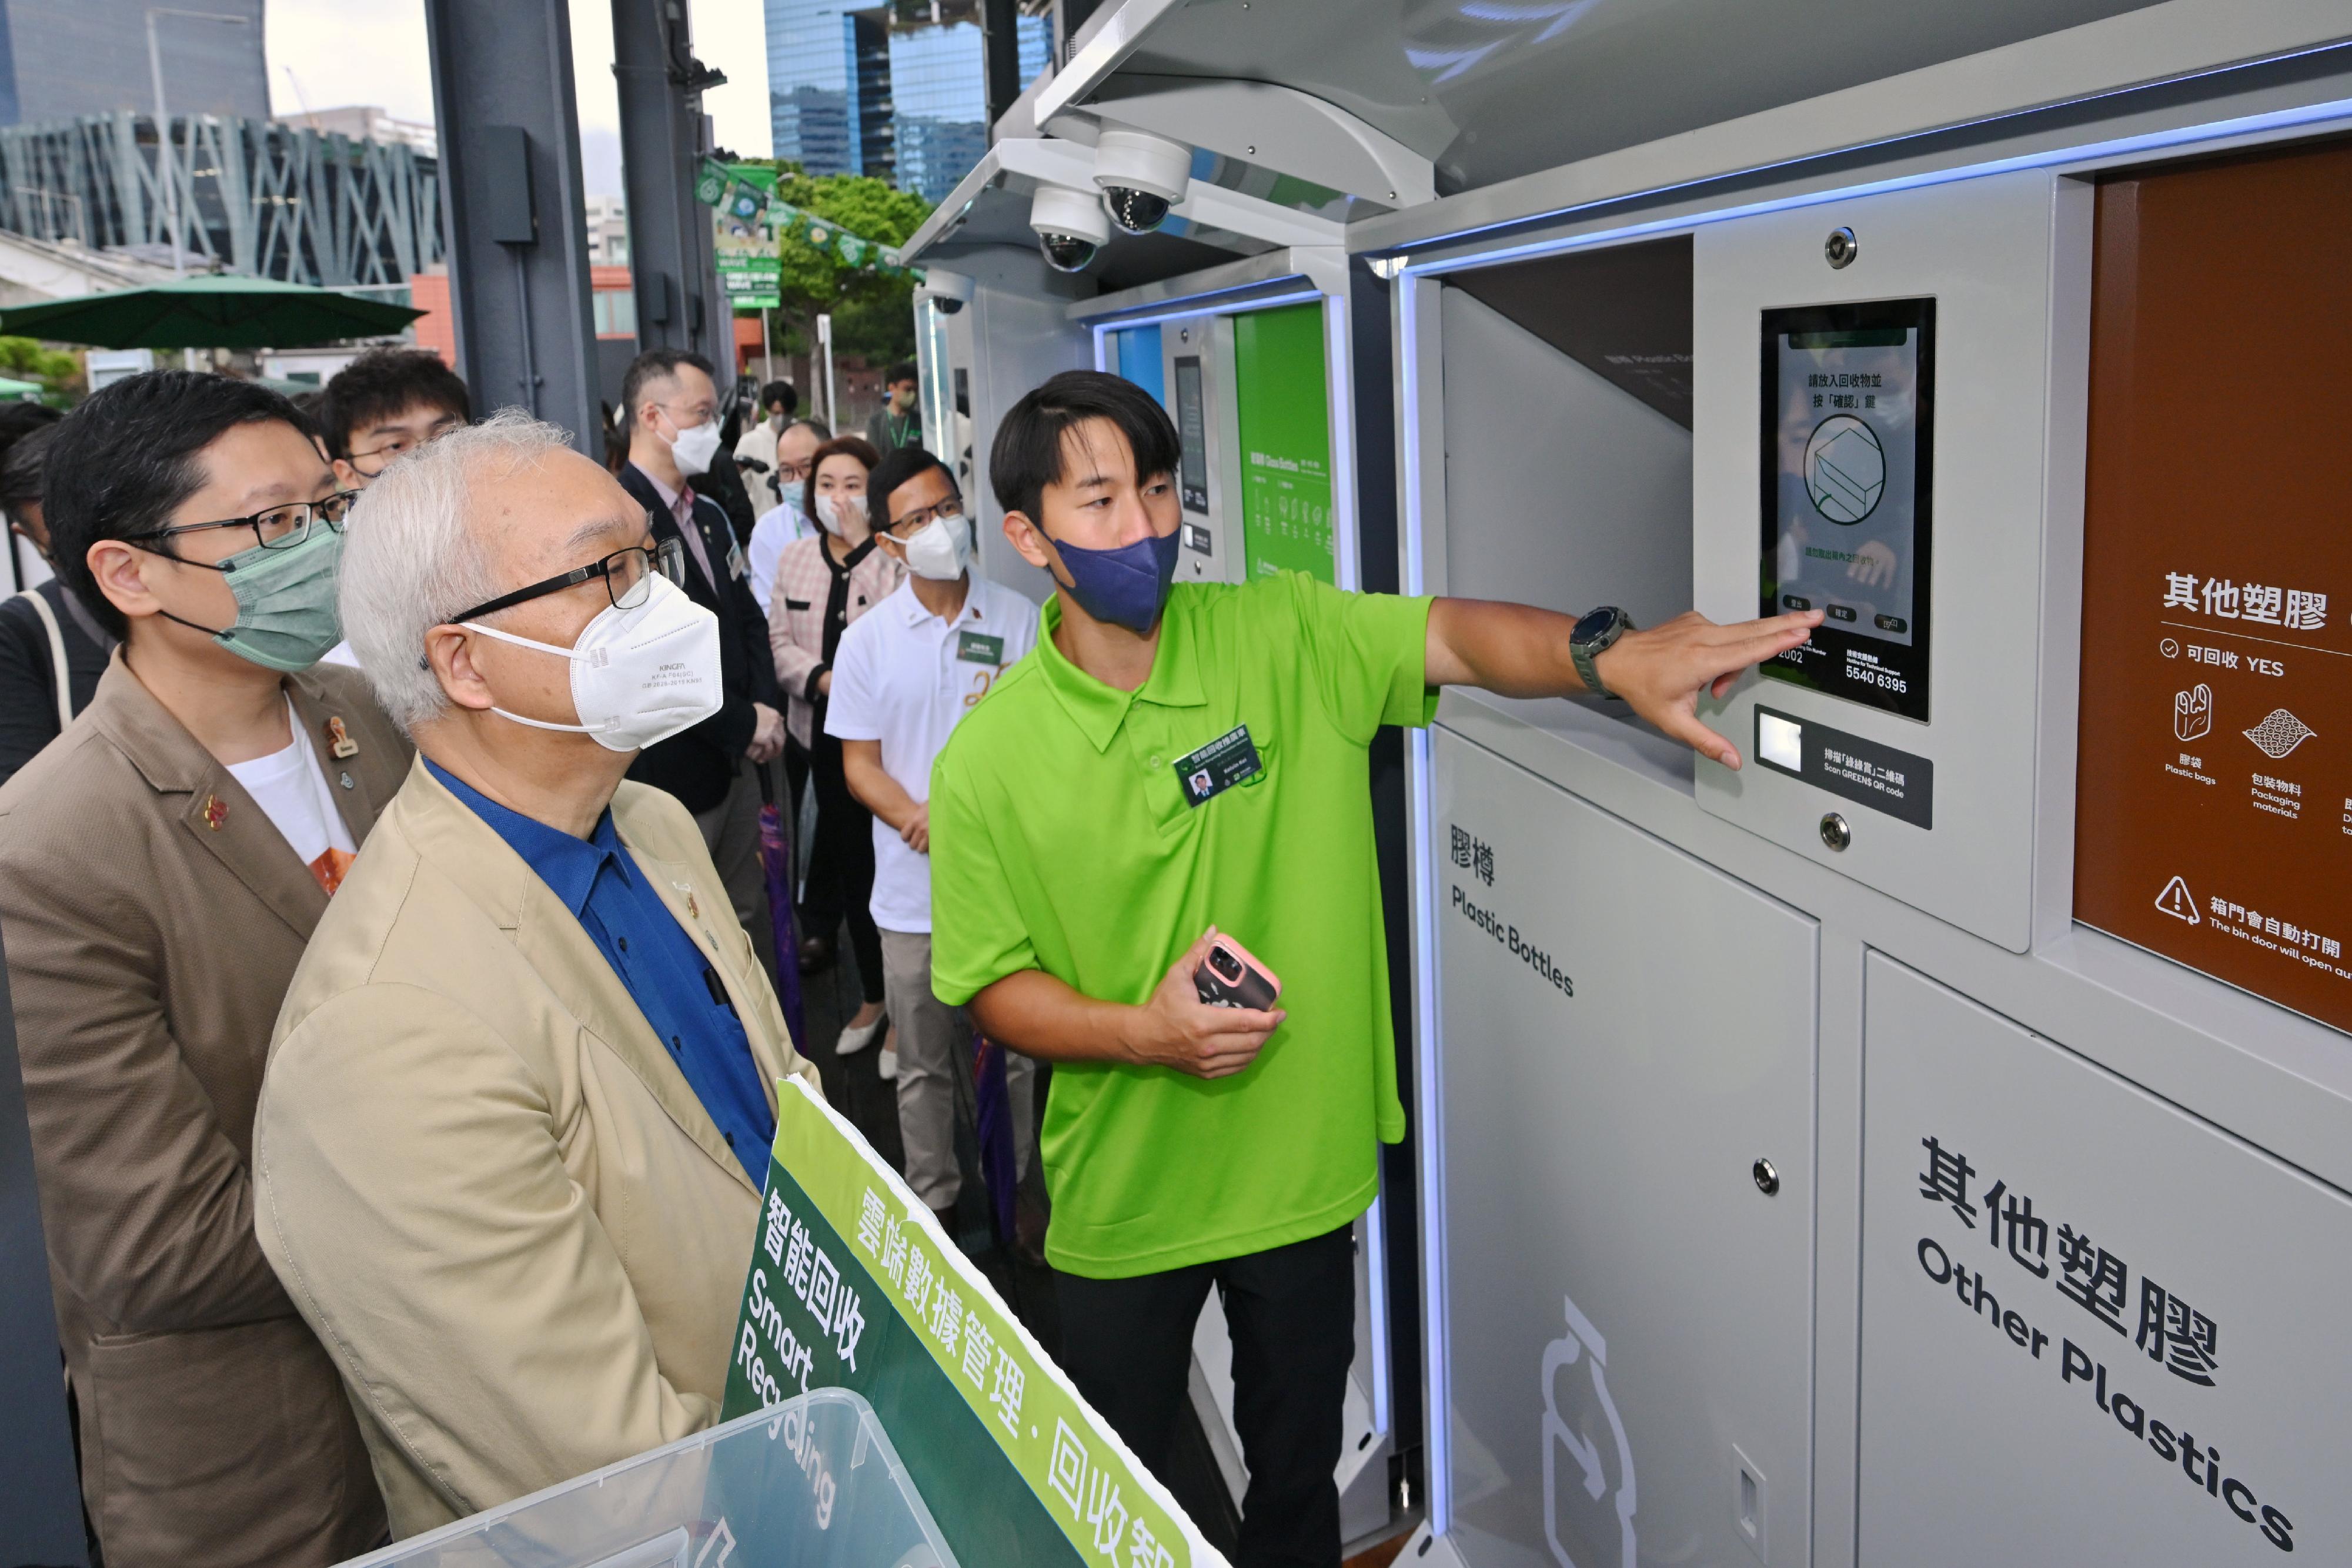 The Kick-off Ceremony of GREEN@COMMUNITY Recycling Month organised by the Environmental Protection Department was held at the Recycling Station GREEN@KWUN TONG today (November 26). Photo shows the Secretary for Environment and Ecology, Mr Tse Chin-wan (second left), and the Chairman of the Environmental Campaign Committee, Mr Simon Wong (first left), being briefed by staff on the operation of the smart recycling system.